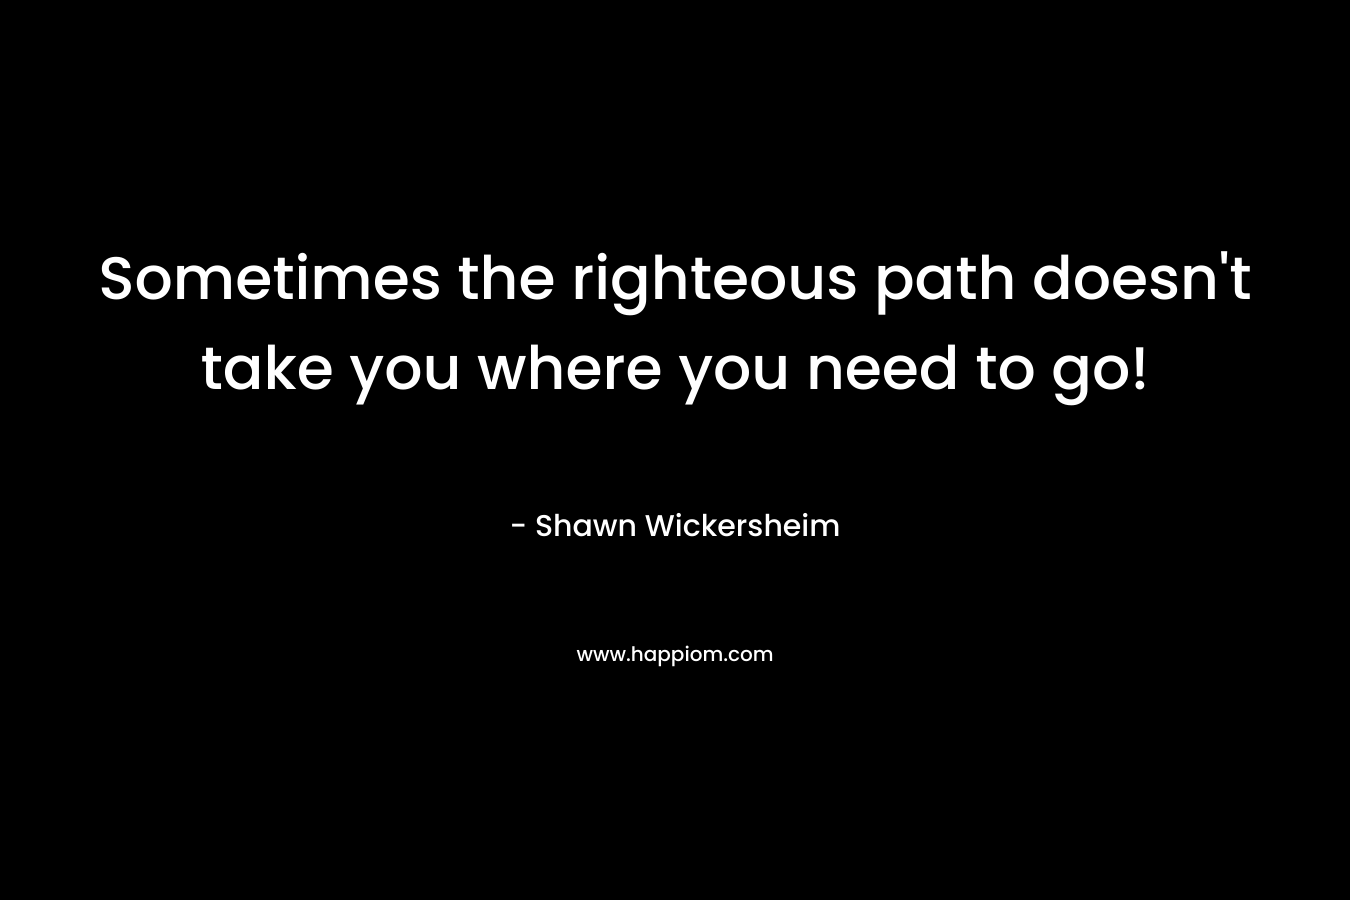 Sometimes the righteous path doesn't take you where you need to go!